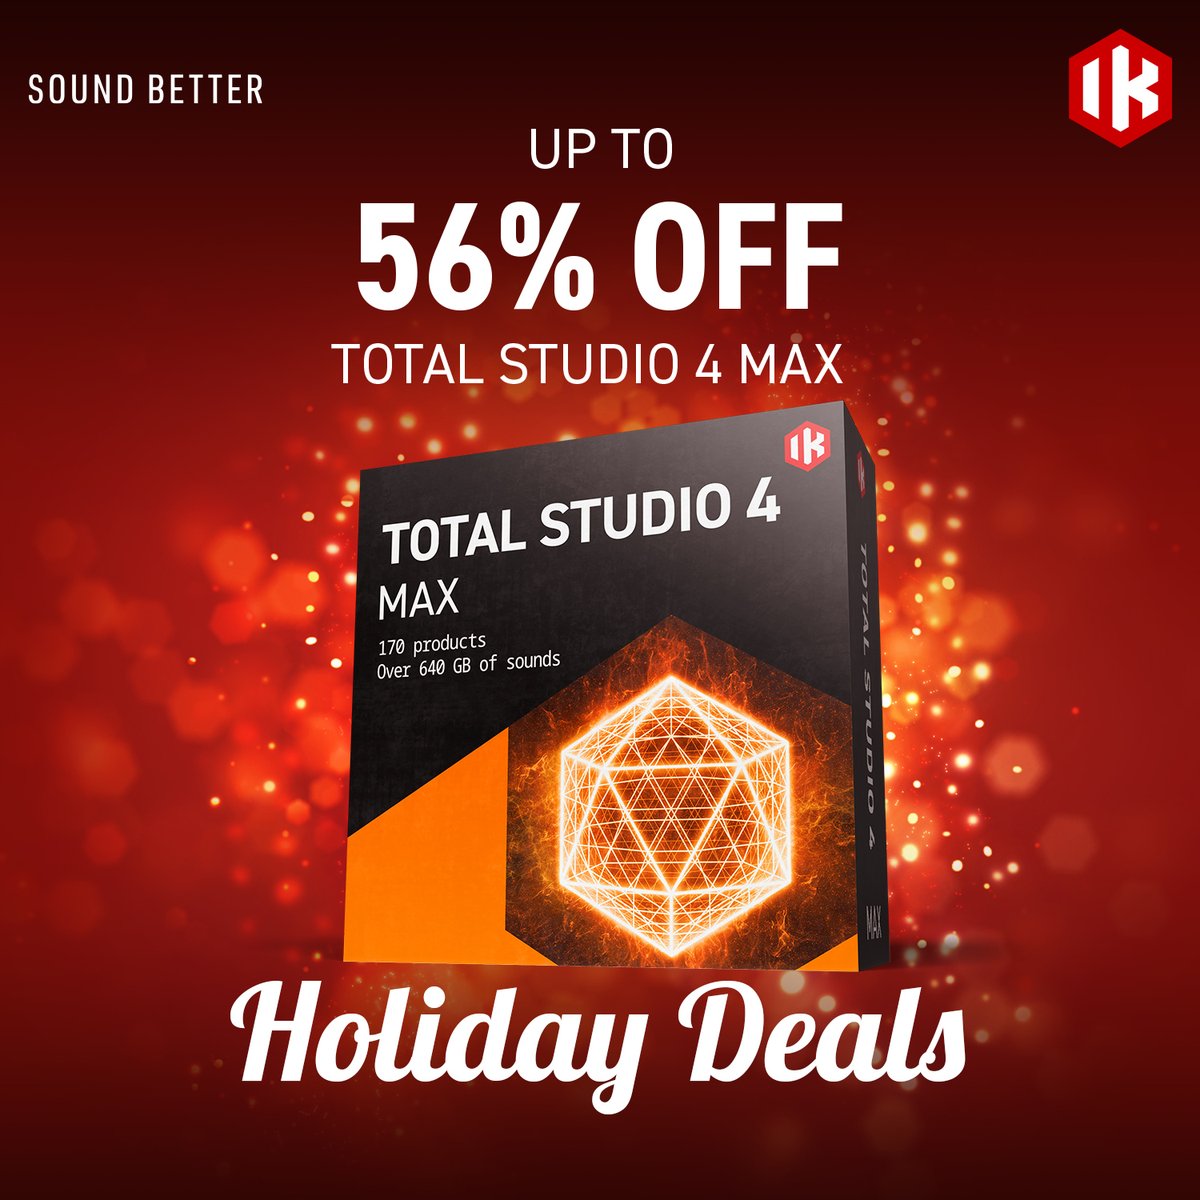 The ultimate collection of authentic sounds and gear with 170 products, over 640 GB of sounds and 507 FX for a combined value of $14,072 if sold separately! Save big until January 1st at bit.ly/holidealsts4max.